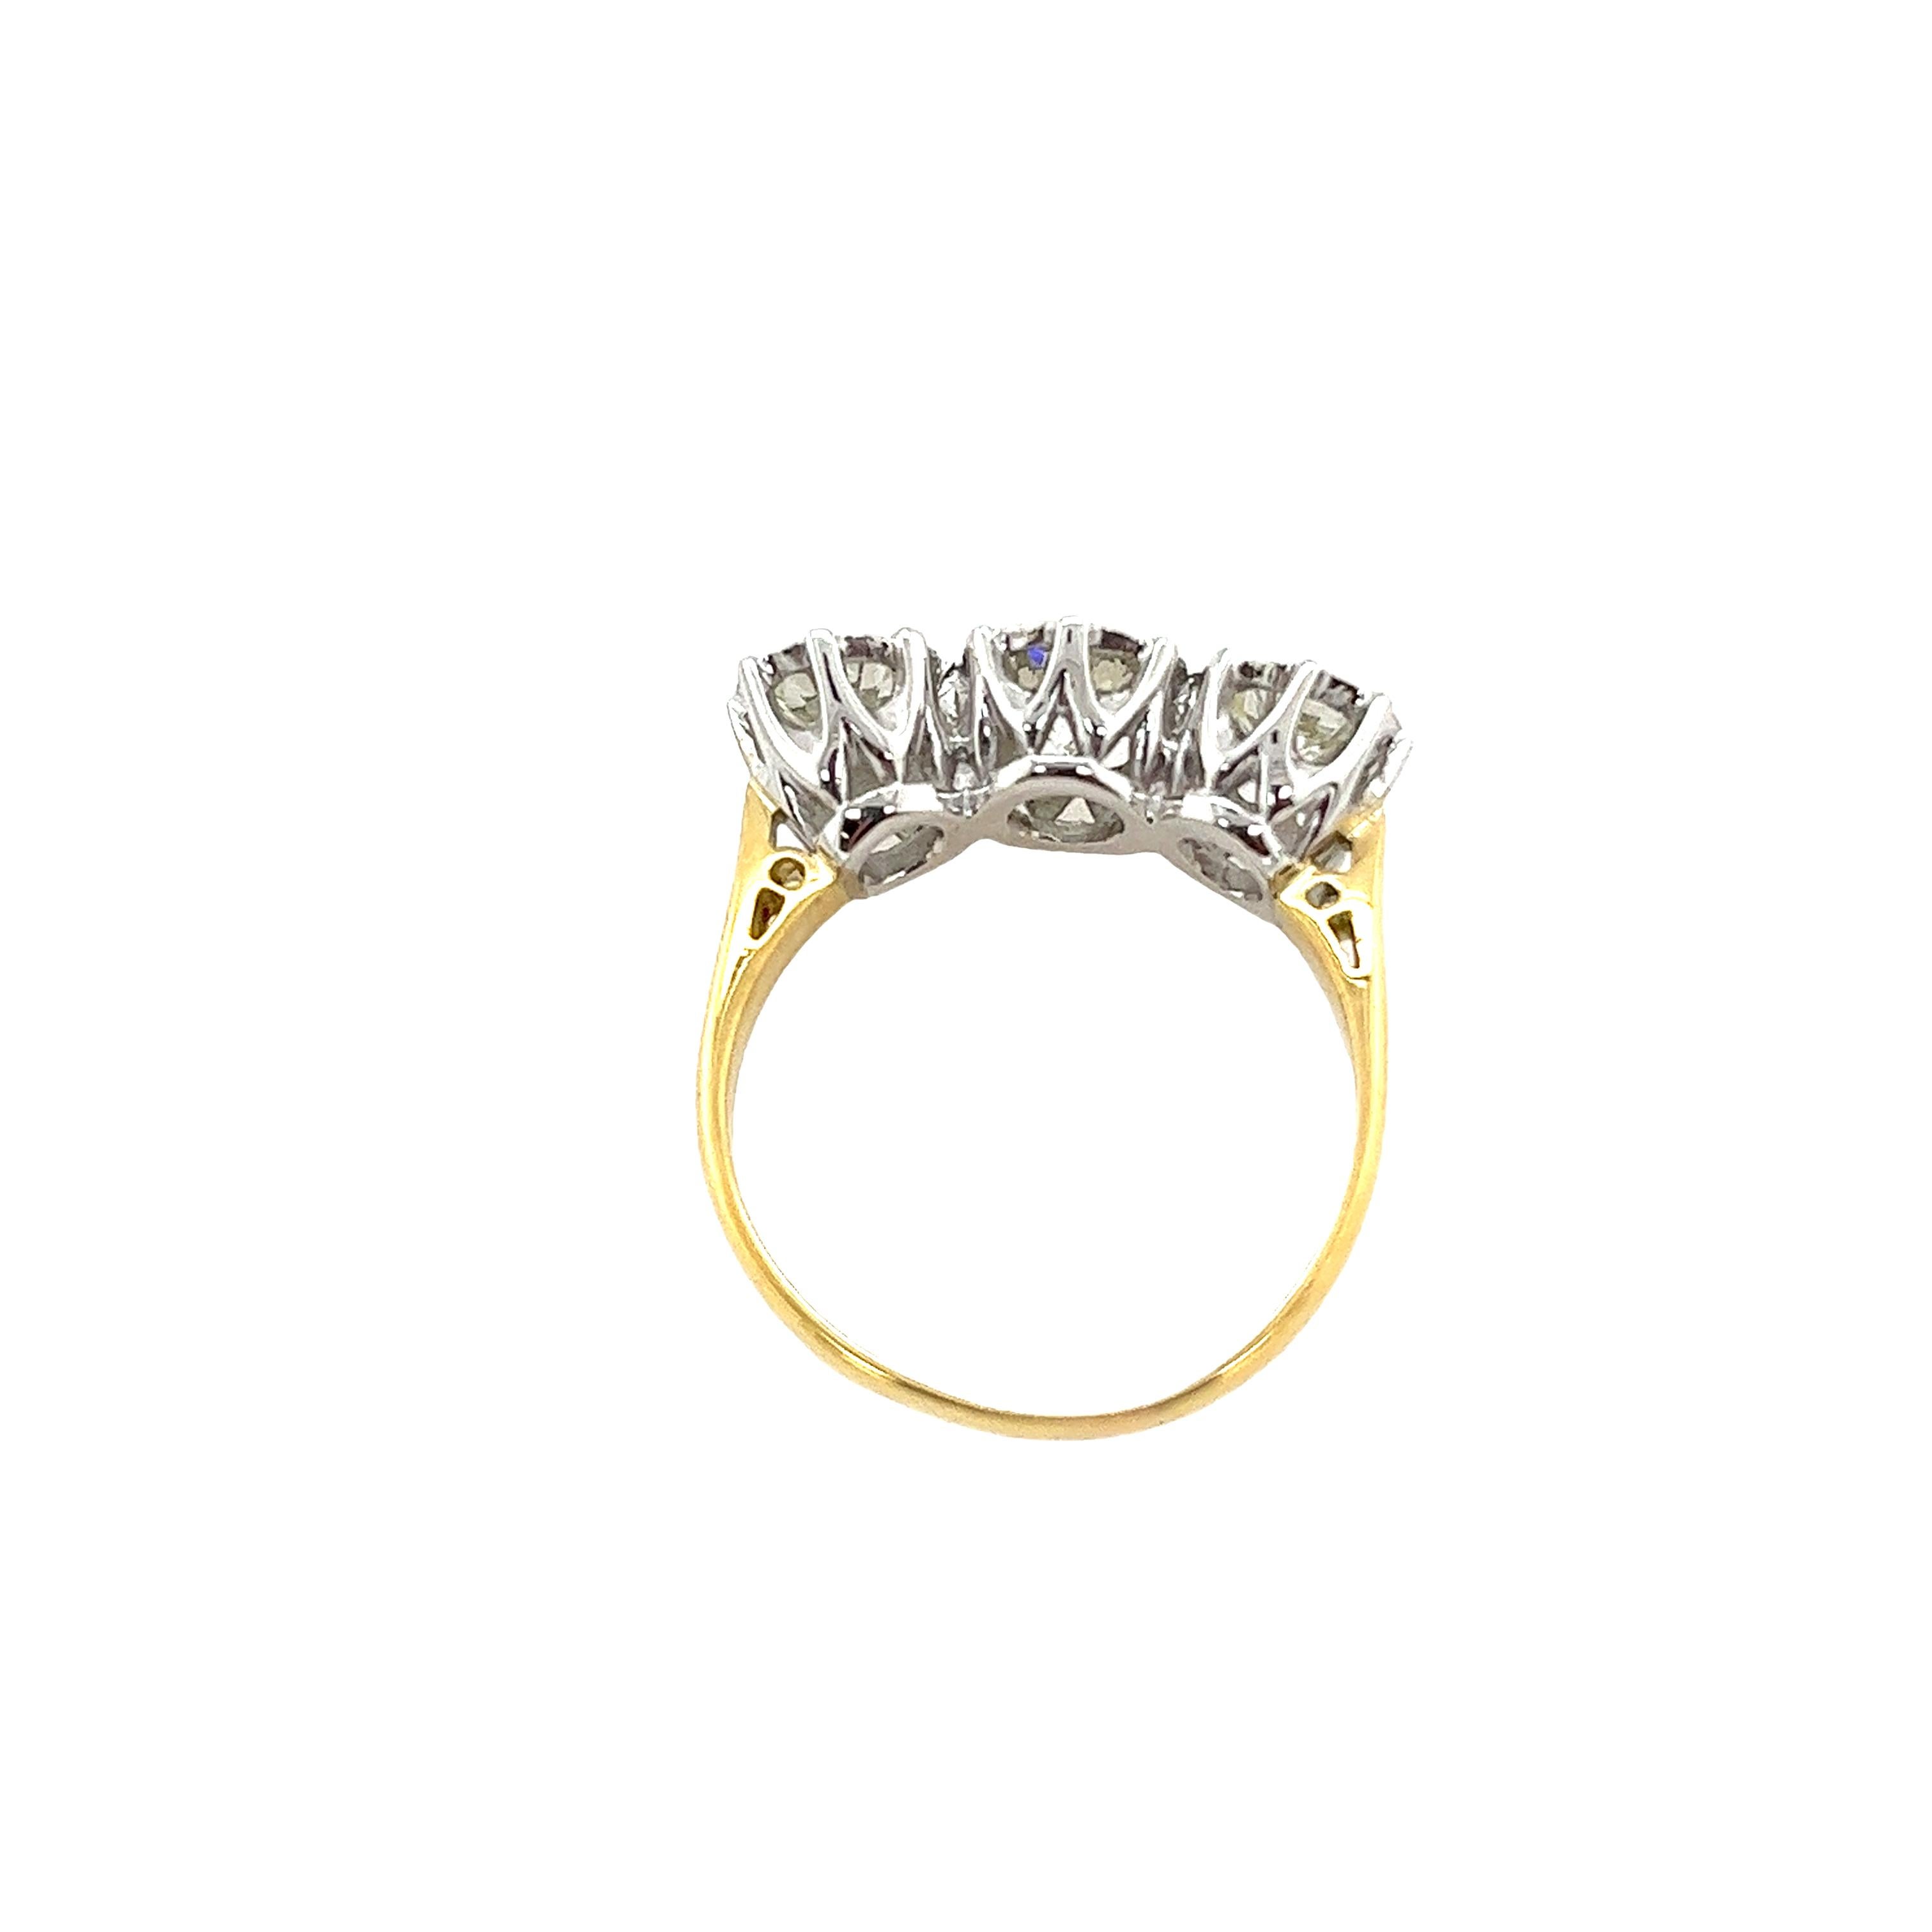 18ct Yellow & White Gold 3 Stone Diamond Ring, Set With 1.46ct Natural Diamonds In Excellent Condition For Sale In London, GB